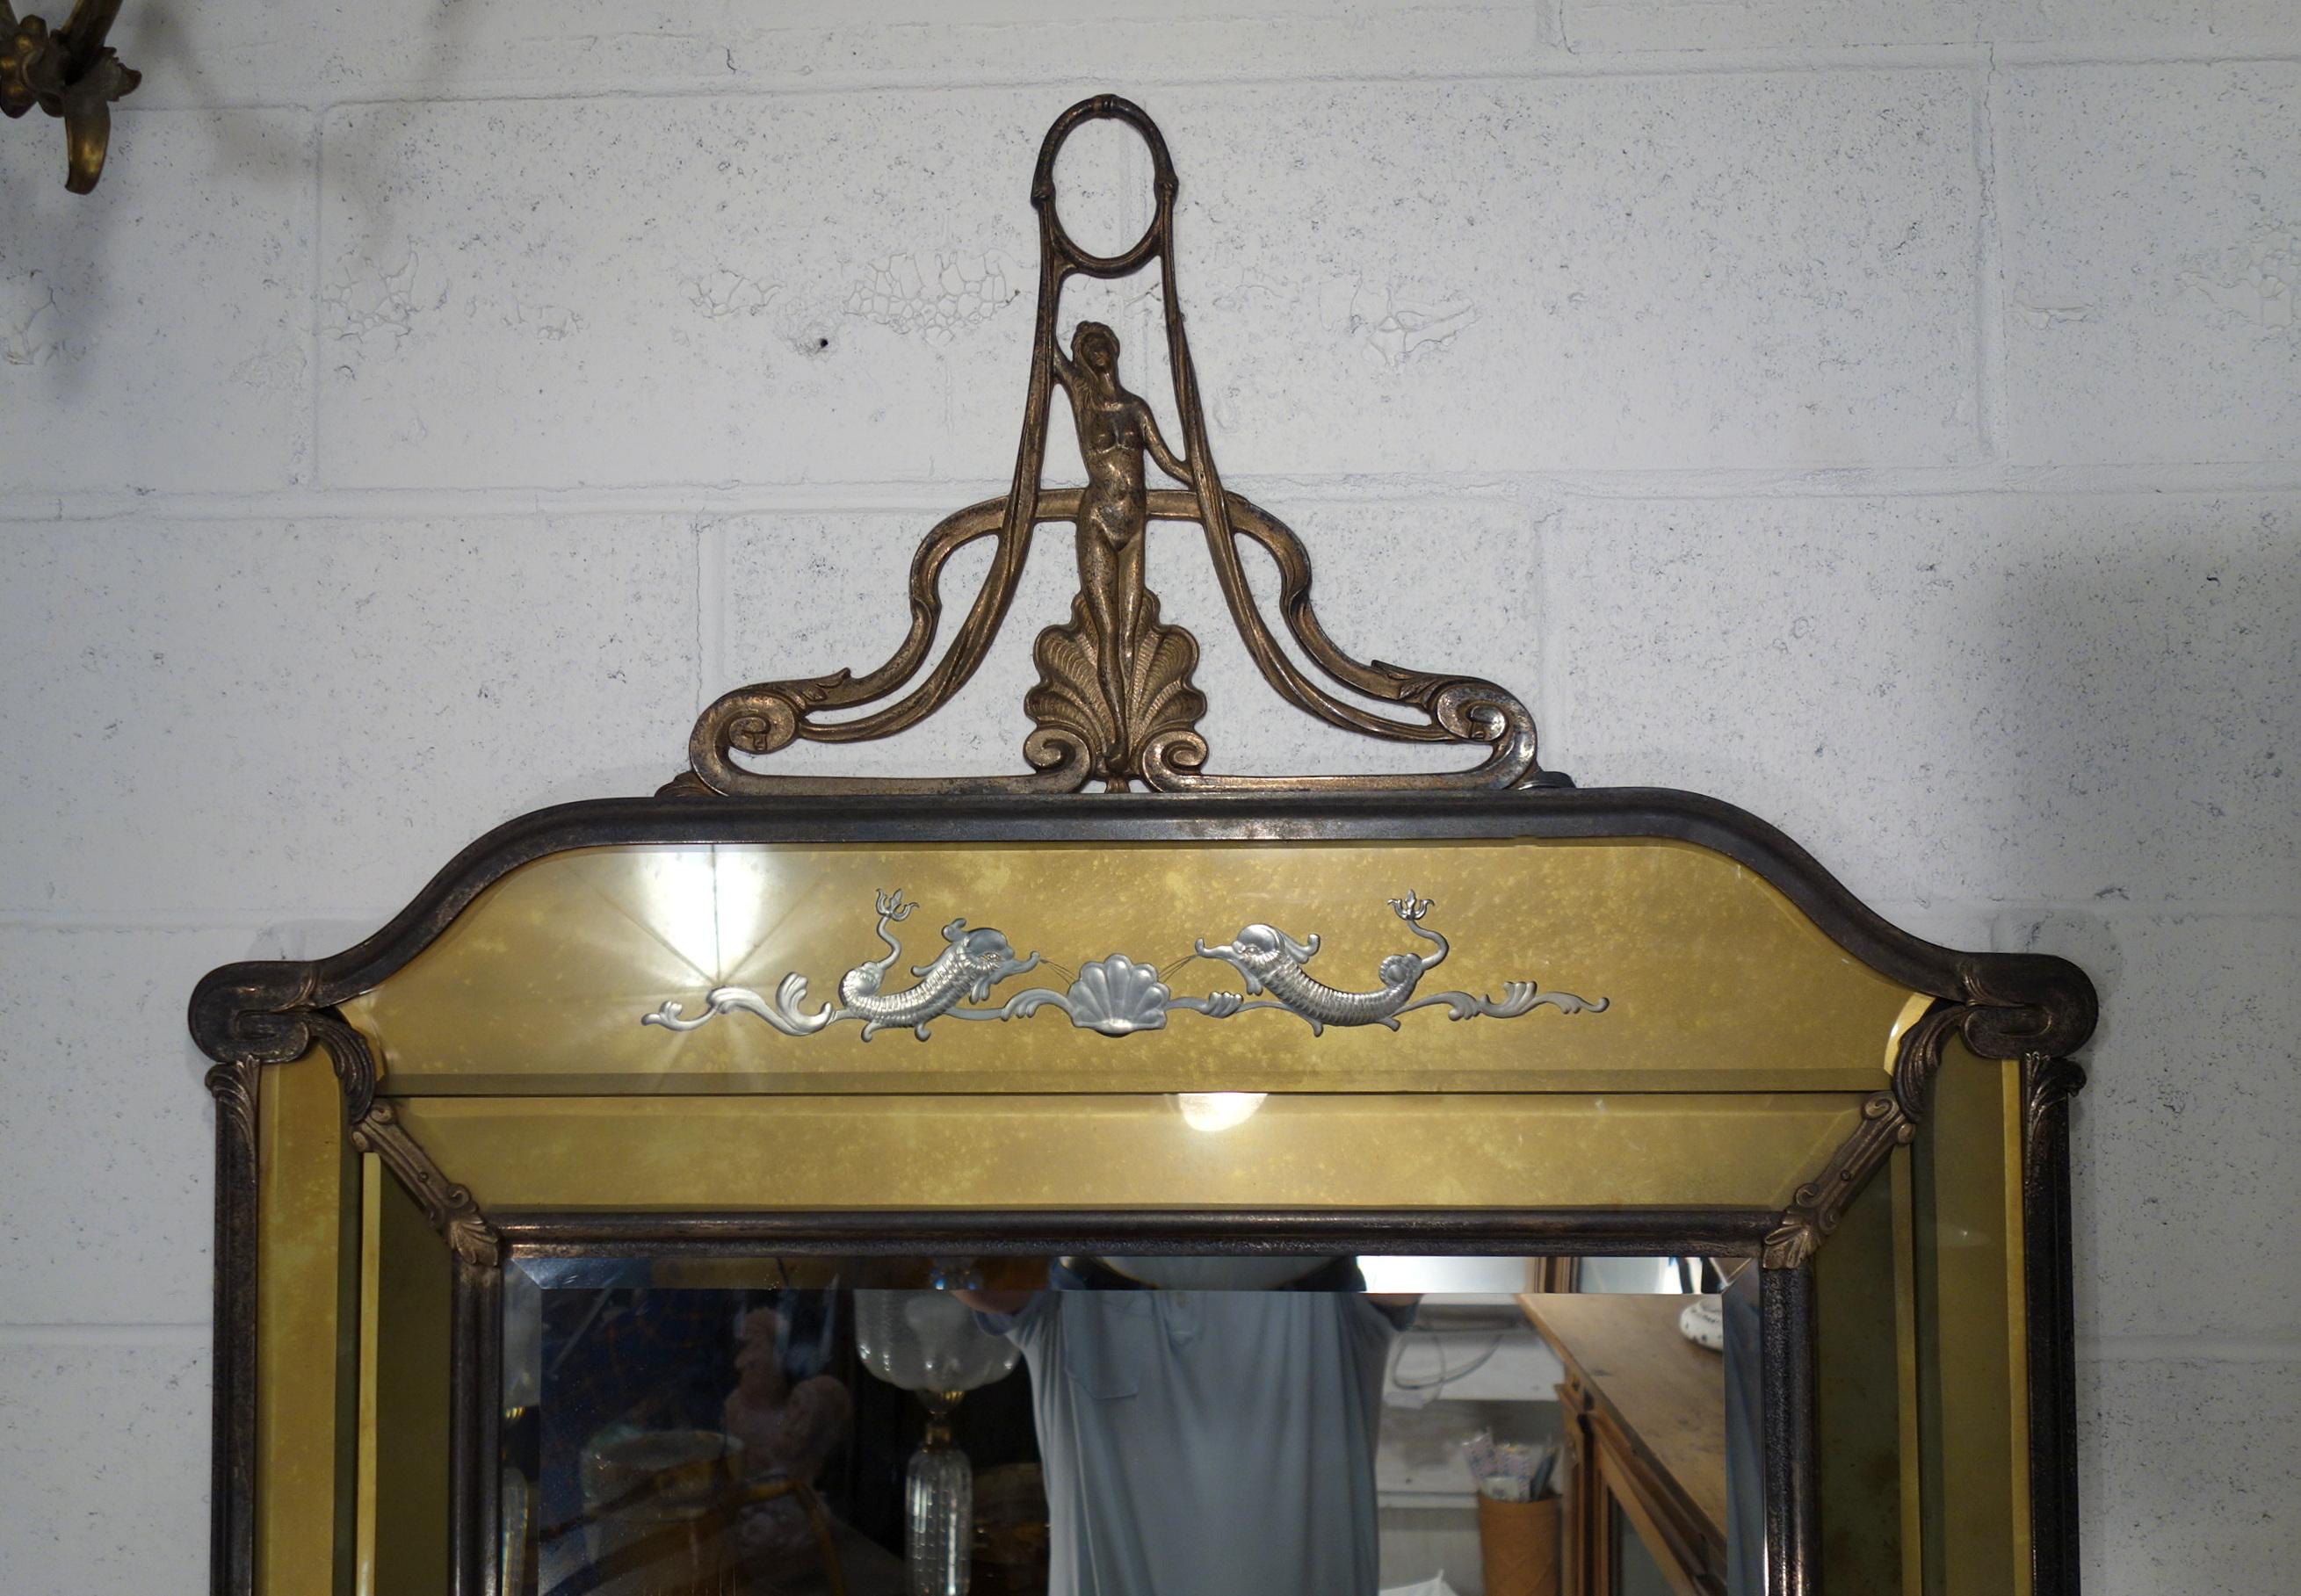 A fine antique Italian Liberty style beveled mirror with golden burnished metal frame and details, facet glass over enamel, and engraving of Renaissance dolphins on top facet over silver metal. Lovely figural top metalwork piece (hinged and